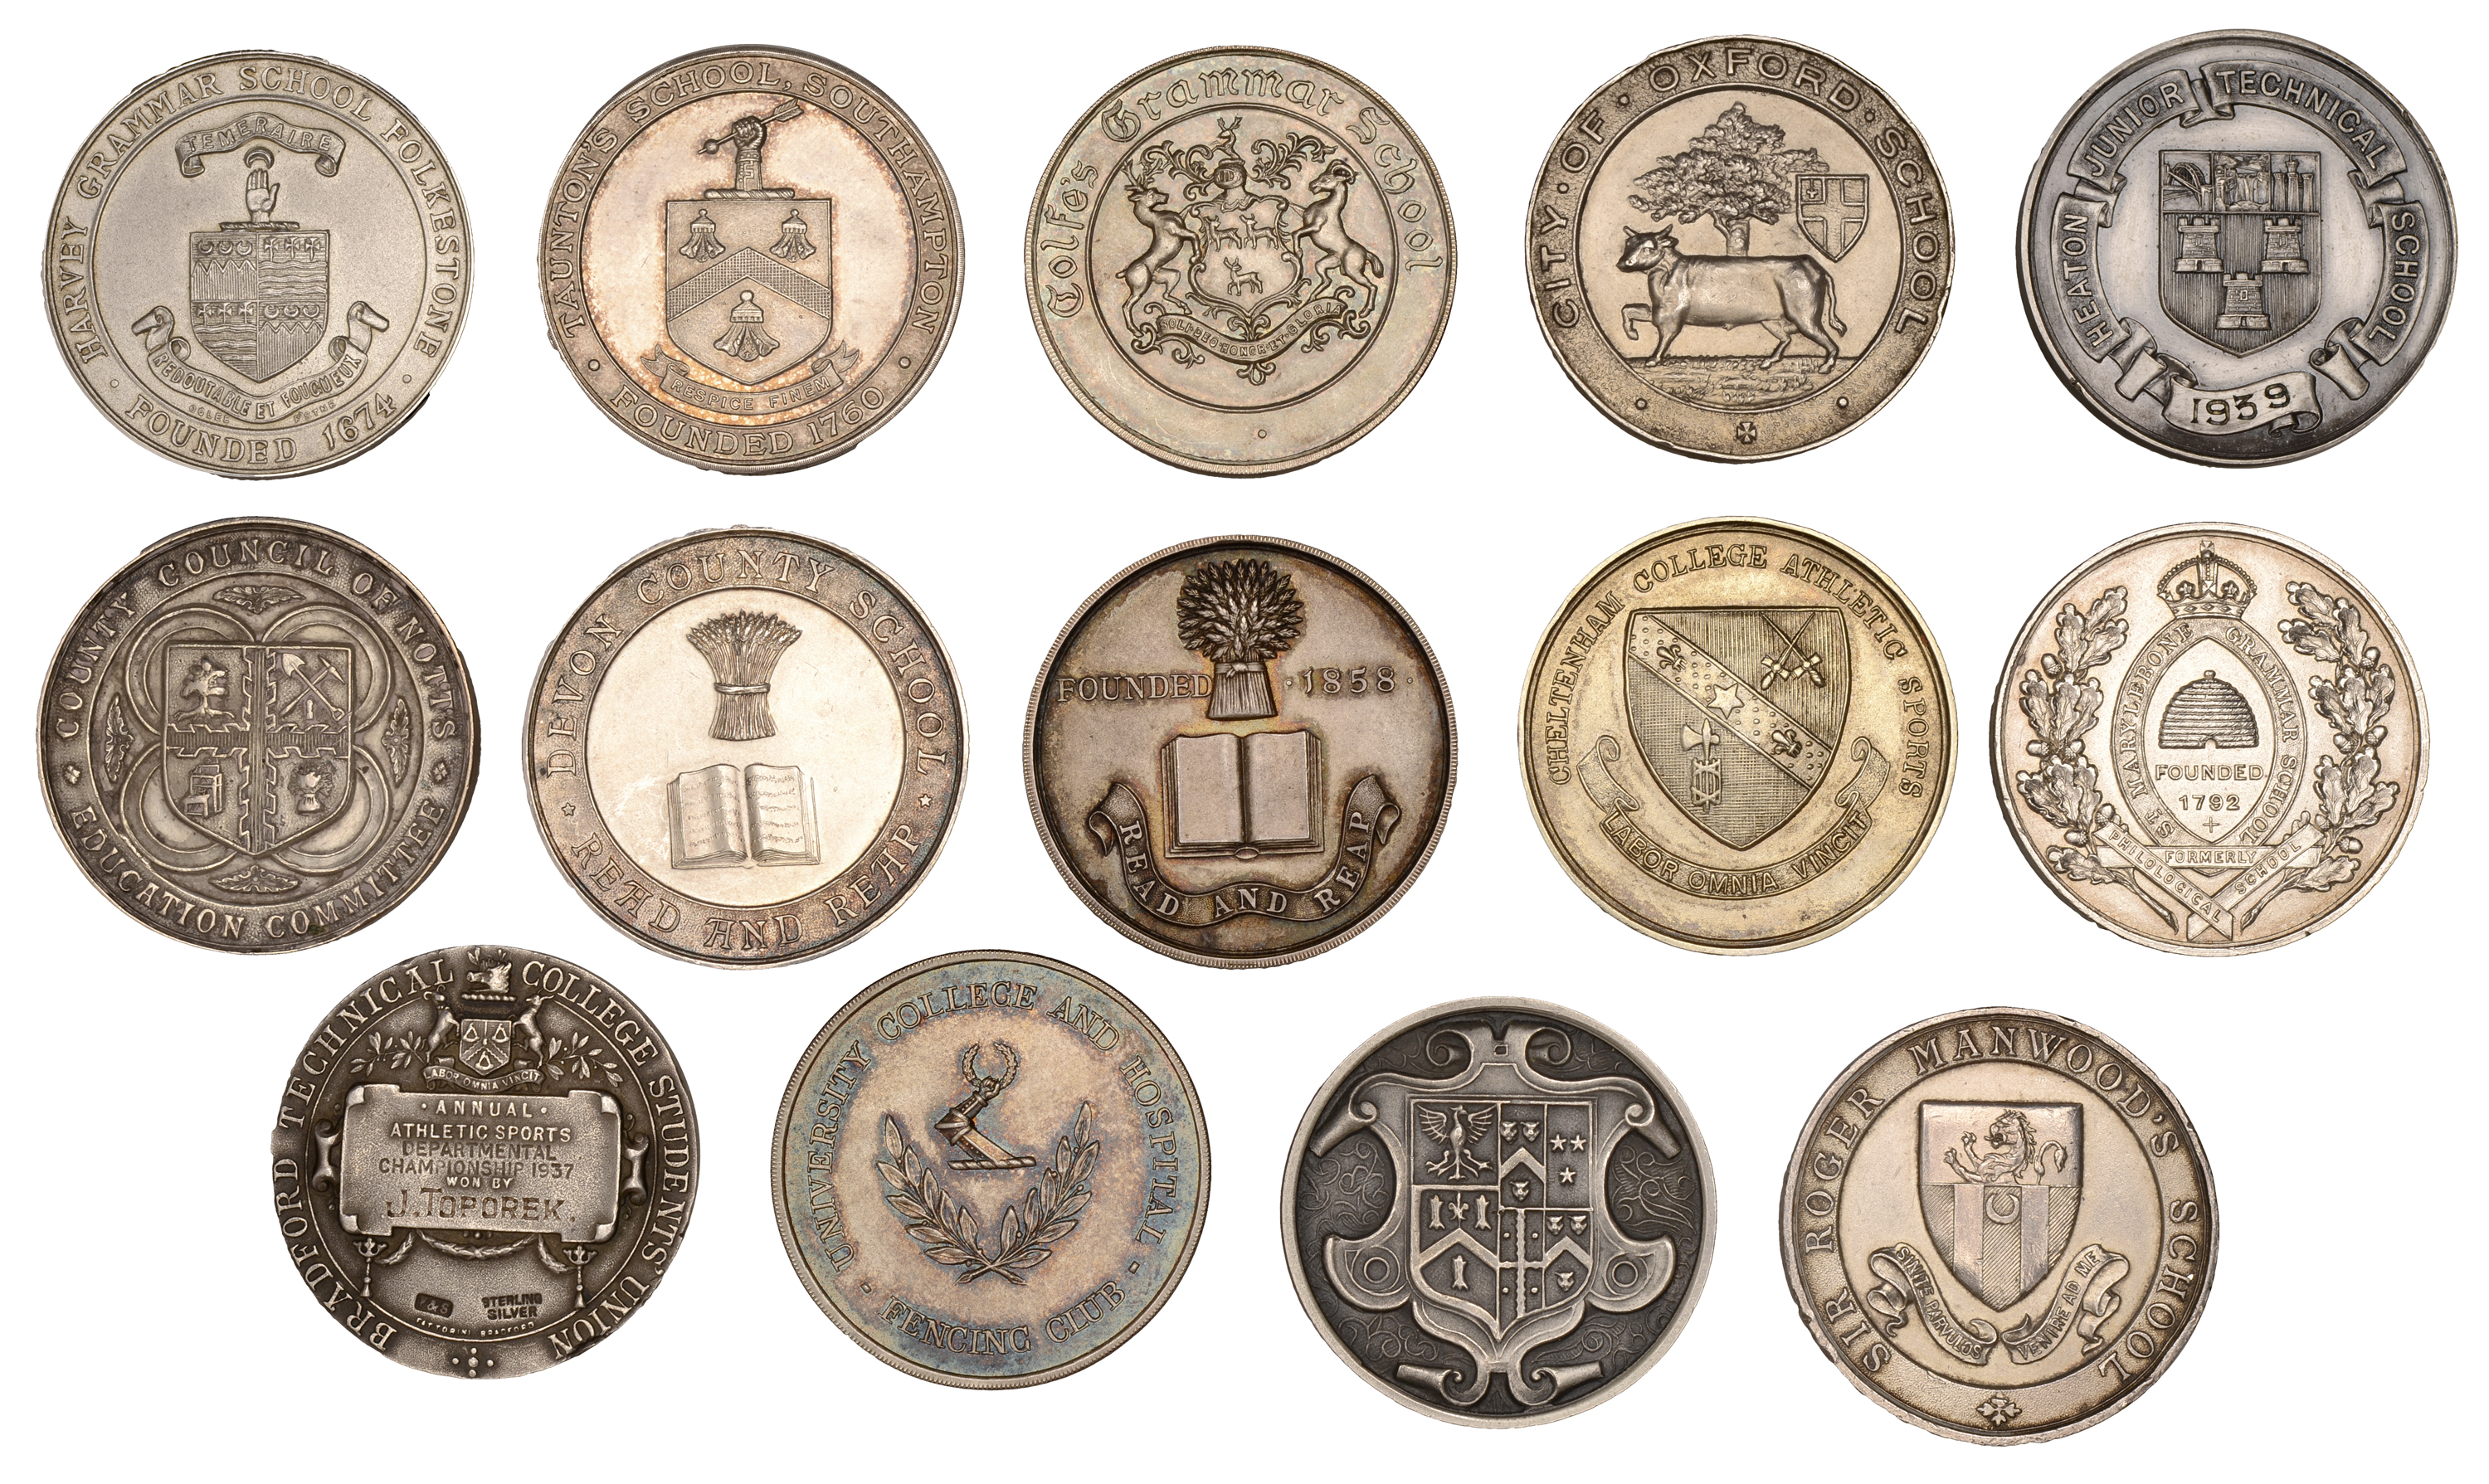 Miscellaneous, Educational award medals in silver (14), all 20th century, from Bradford, Bre...